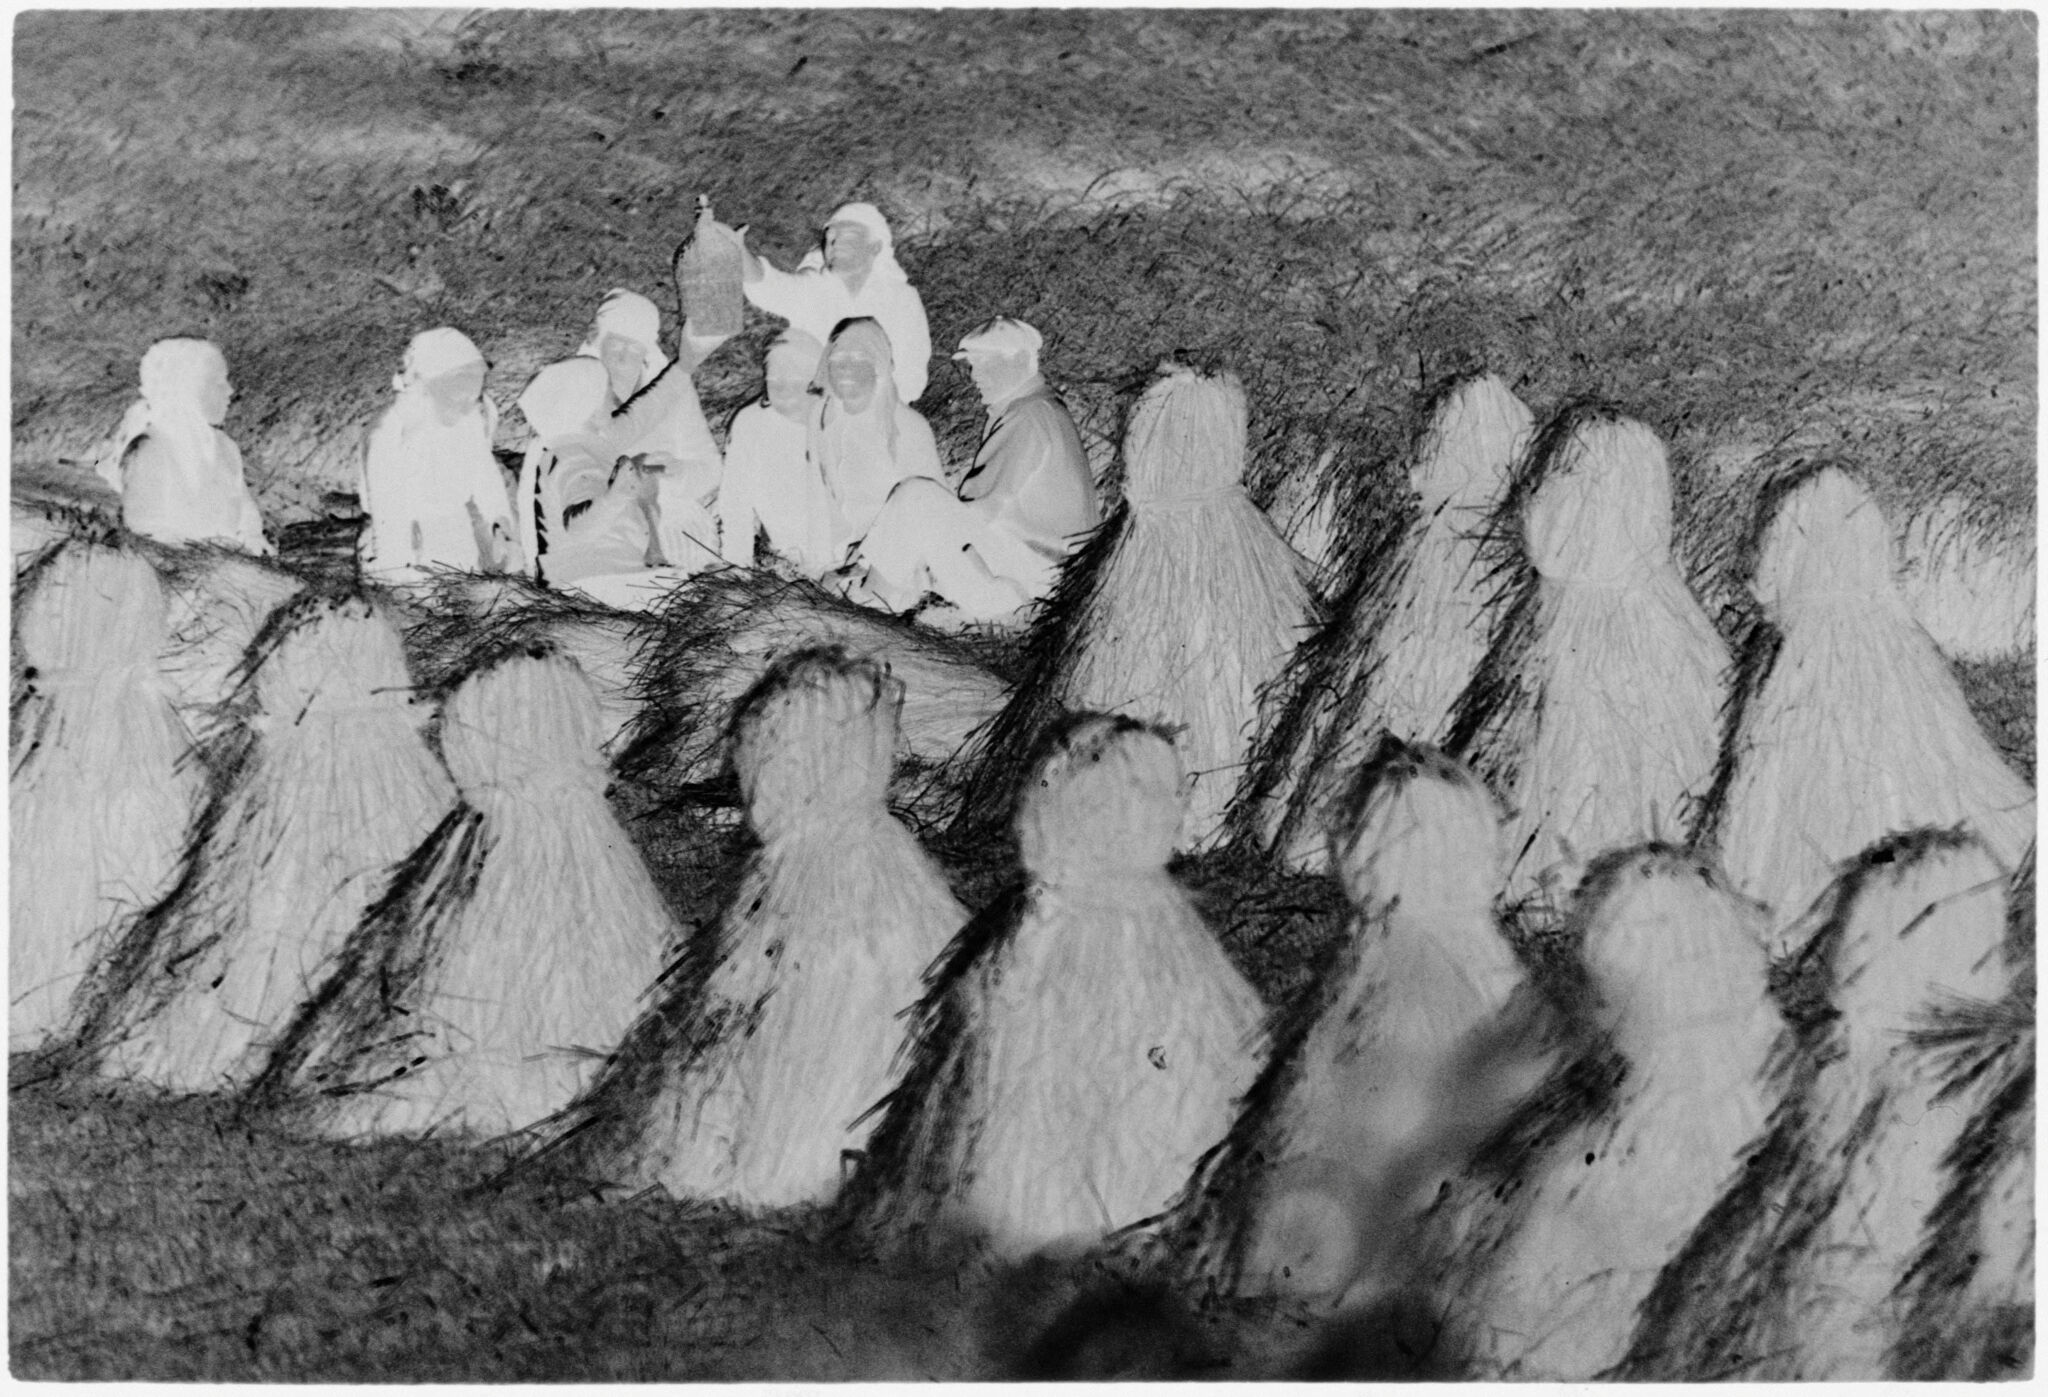 Untitled (Group Of Women Sitting By Rows Of Haystacks, Nazaré, Portugal)